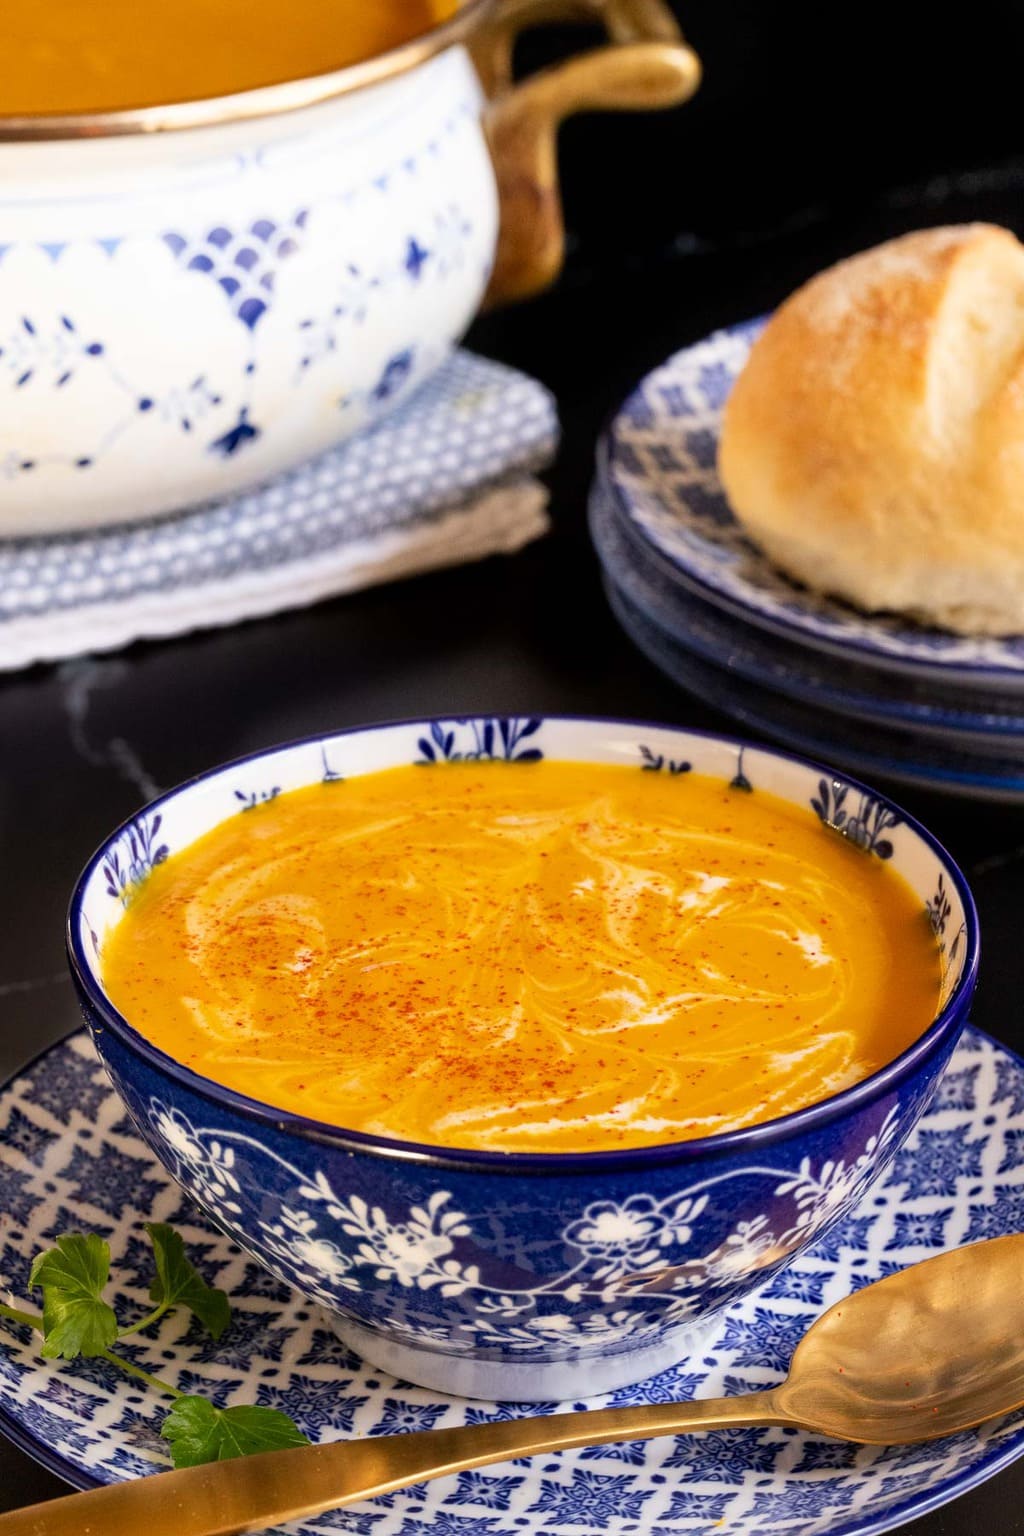 Vertical closeup photo of a bowl of Red Lentil Carrot Ginger Soup in a blue and white patterned serving bowl with a pot of the soup in the background.